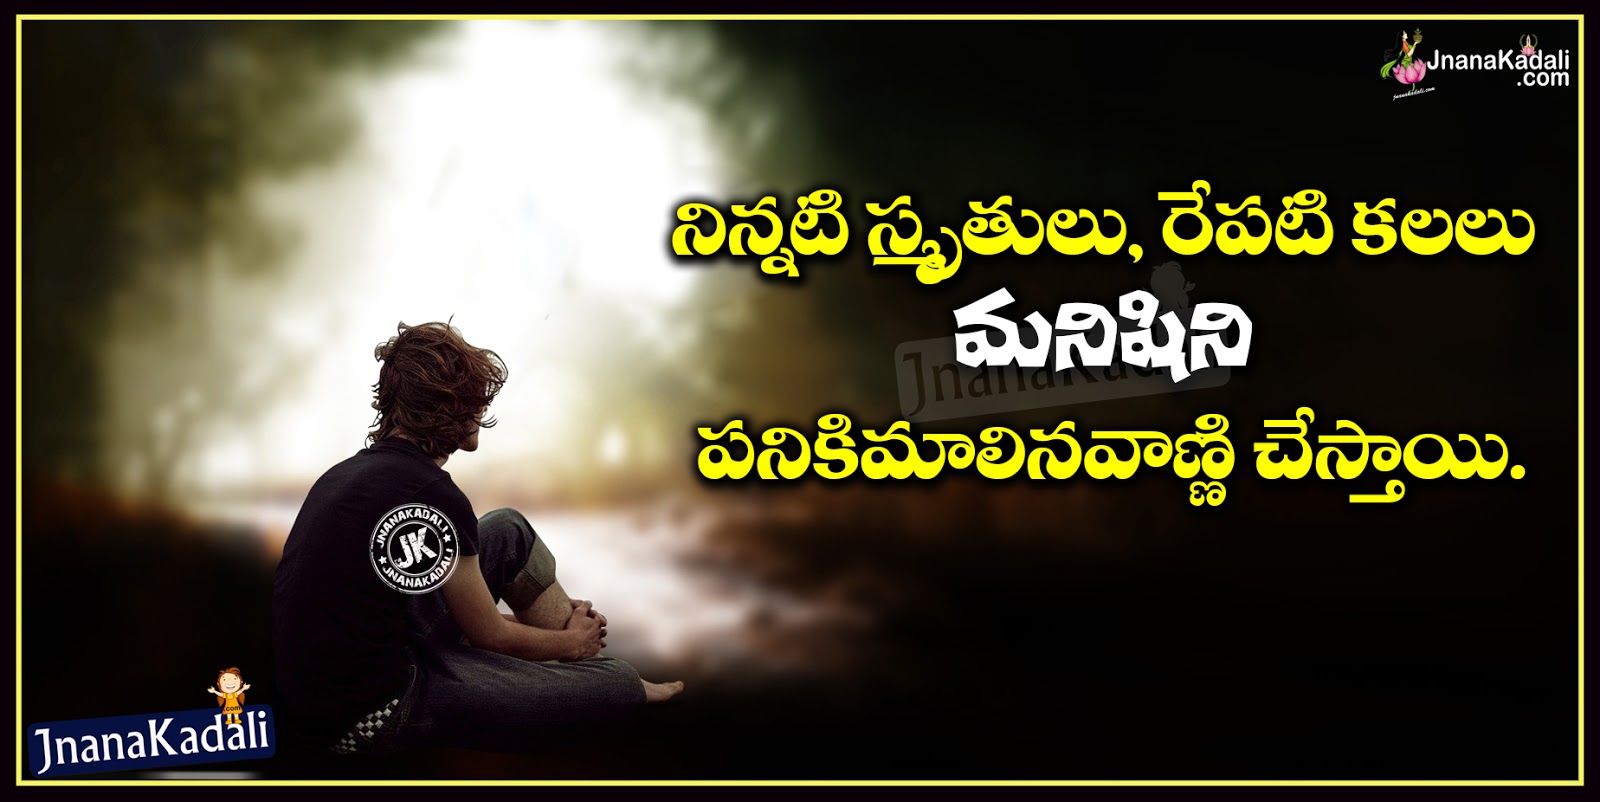 Here is a Nice Telugu Life Lessons Quotations in Telugu Telugu No Money in Pocket Quotations and Sayings Hungry Stomach Quotes in Telugu